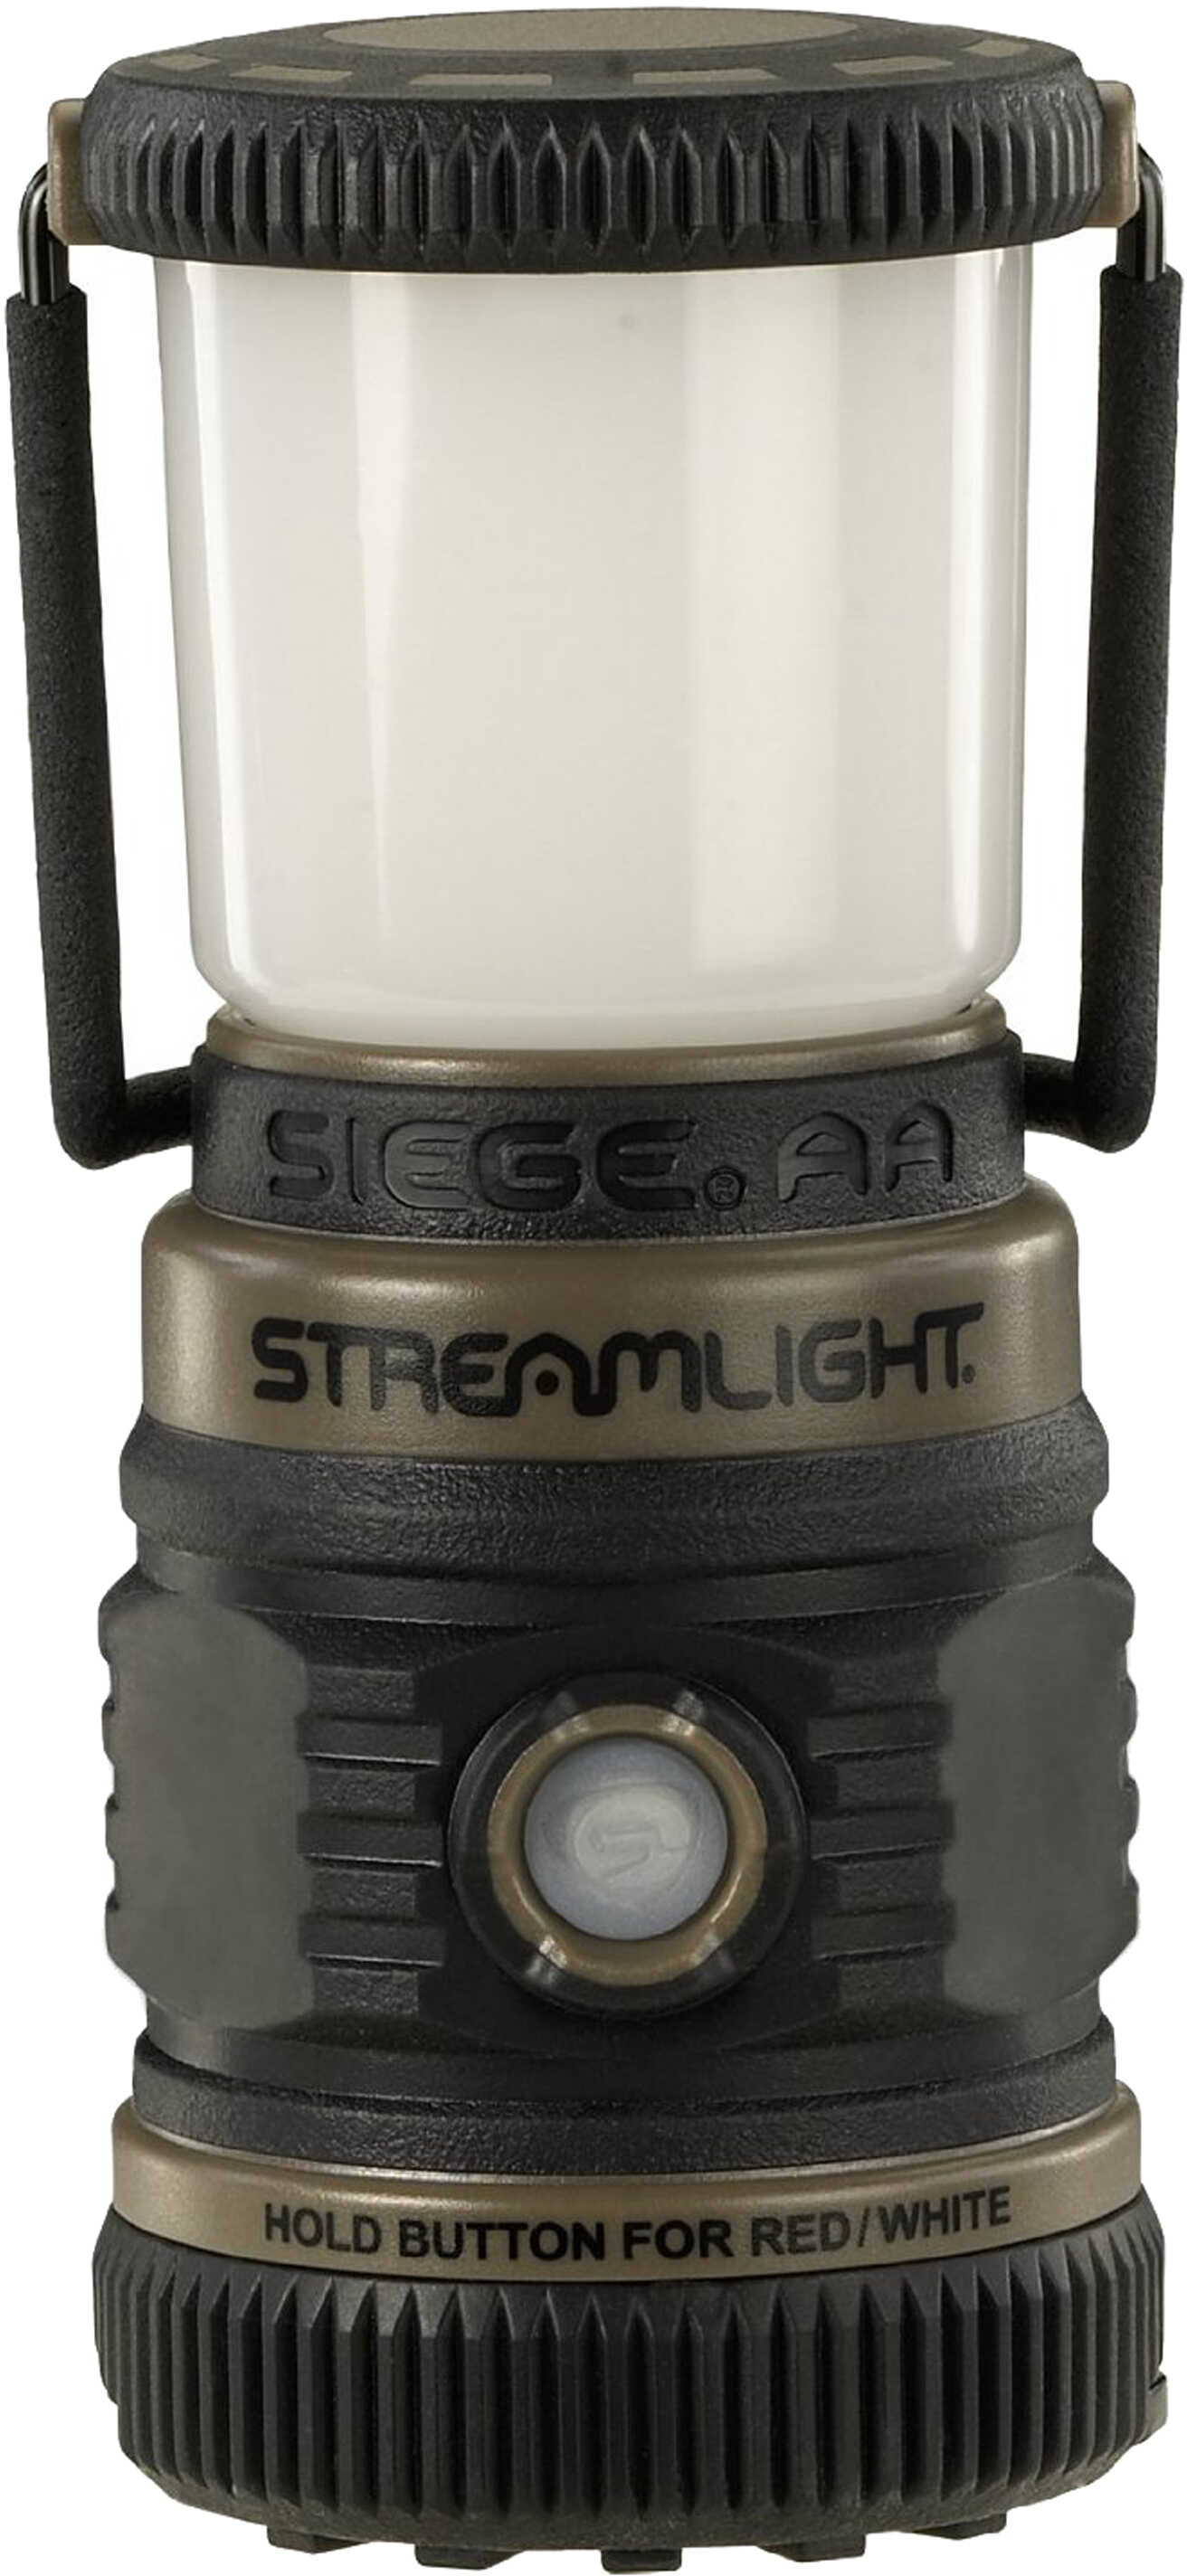 Streamlight Siege Lantern 200/100/50 lumens White C4 LED SOS Red LED 7 Hour Run Time 3x AA batteries Coyote Brown 44941